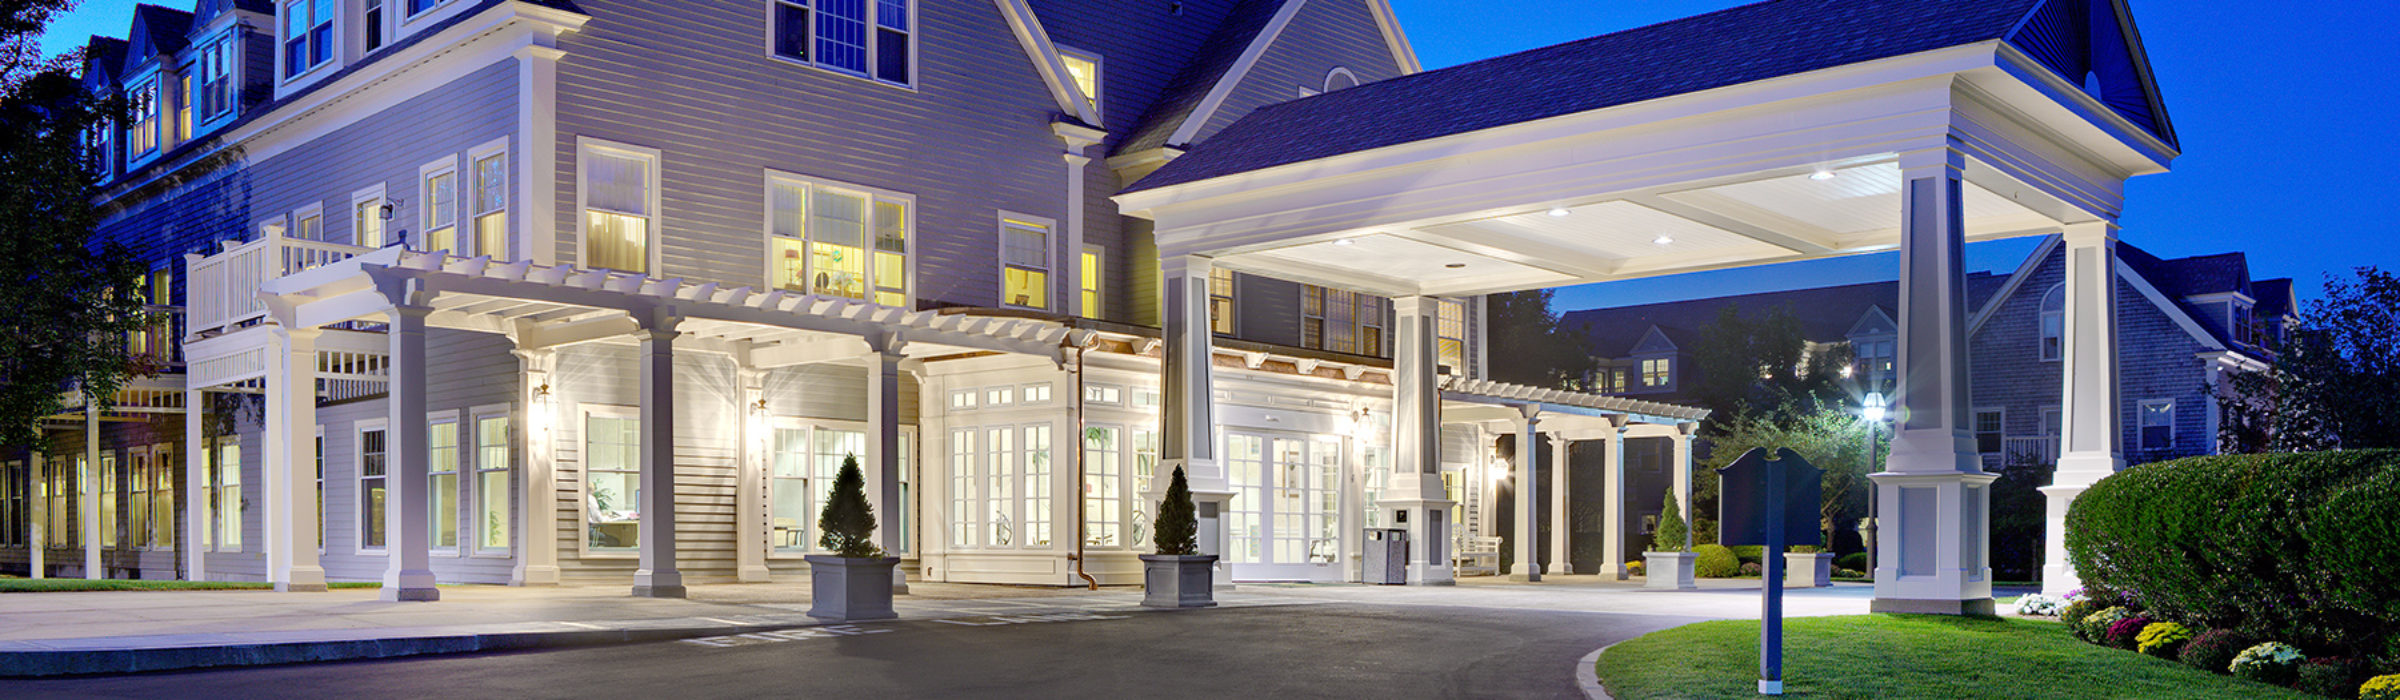 Exterior of a Welch Senior Living property at night